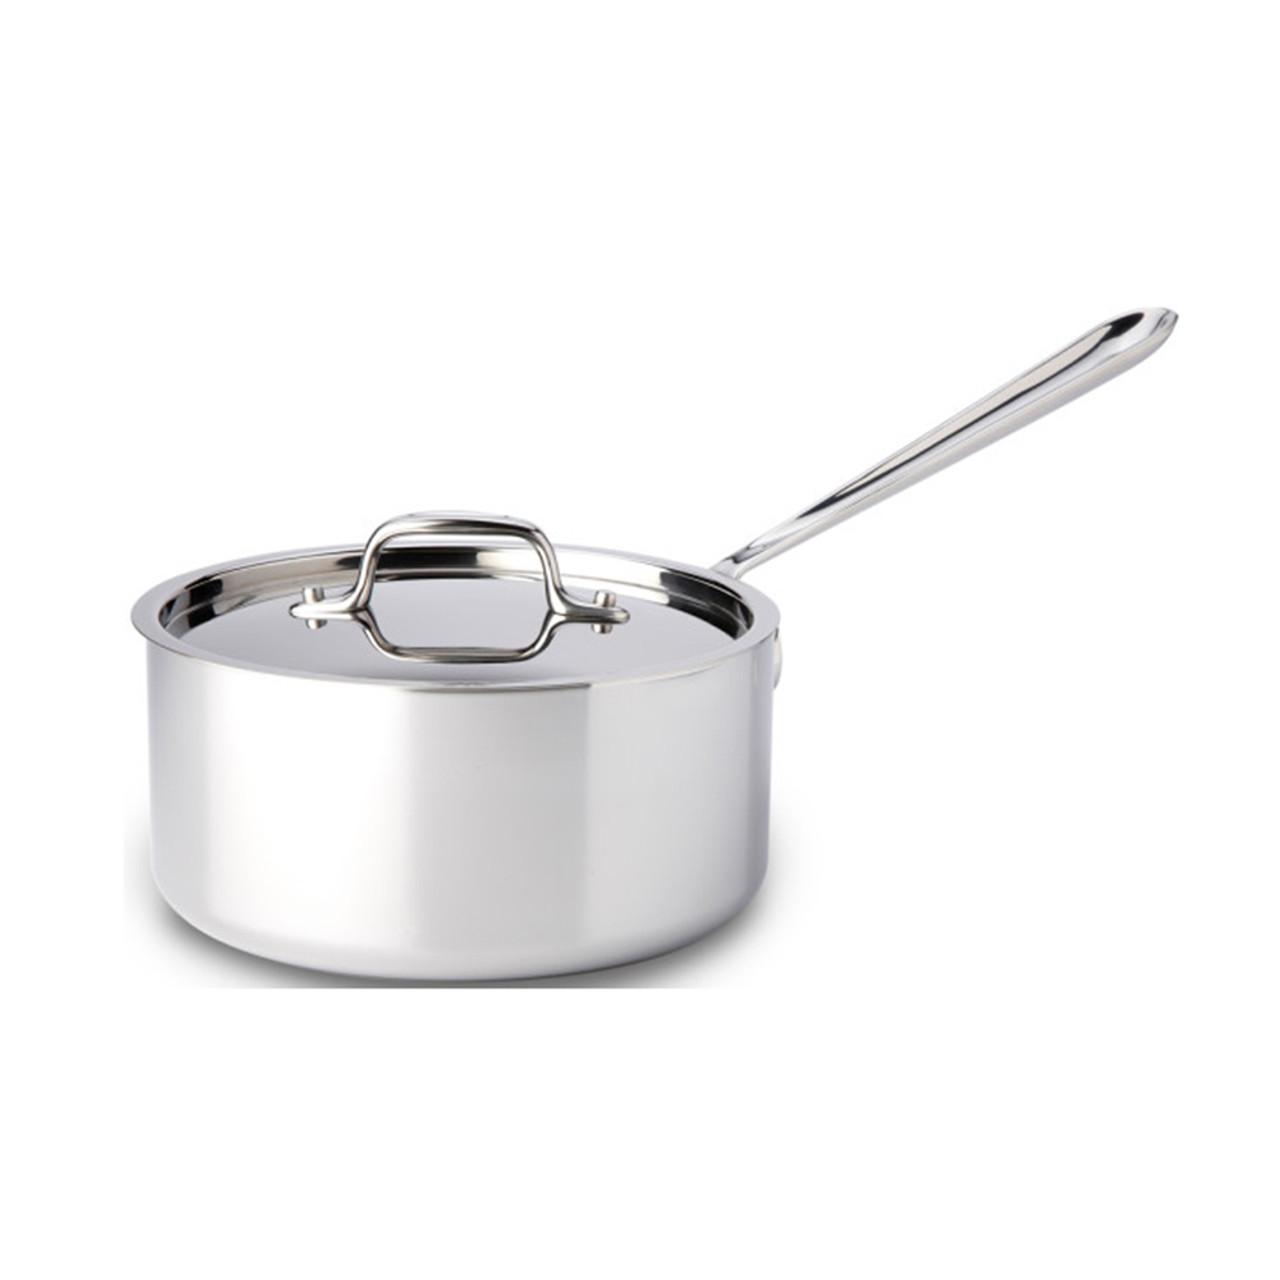 https://cdn11.bigcommerce.com/s-hccytny0od/images/stencil/1280x1280/products/498/1871/all-clad-stainless-steel-sauce-pan-3qt__37440.1588444278.jpg?c=2?imbypass=on